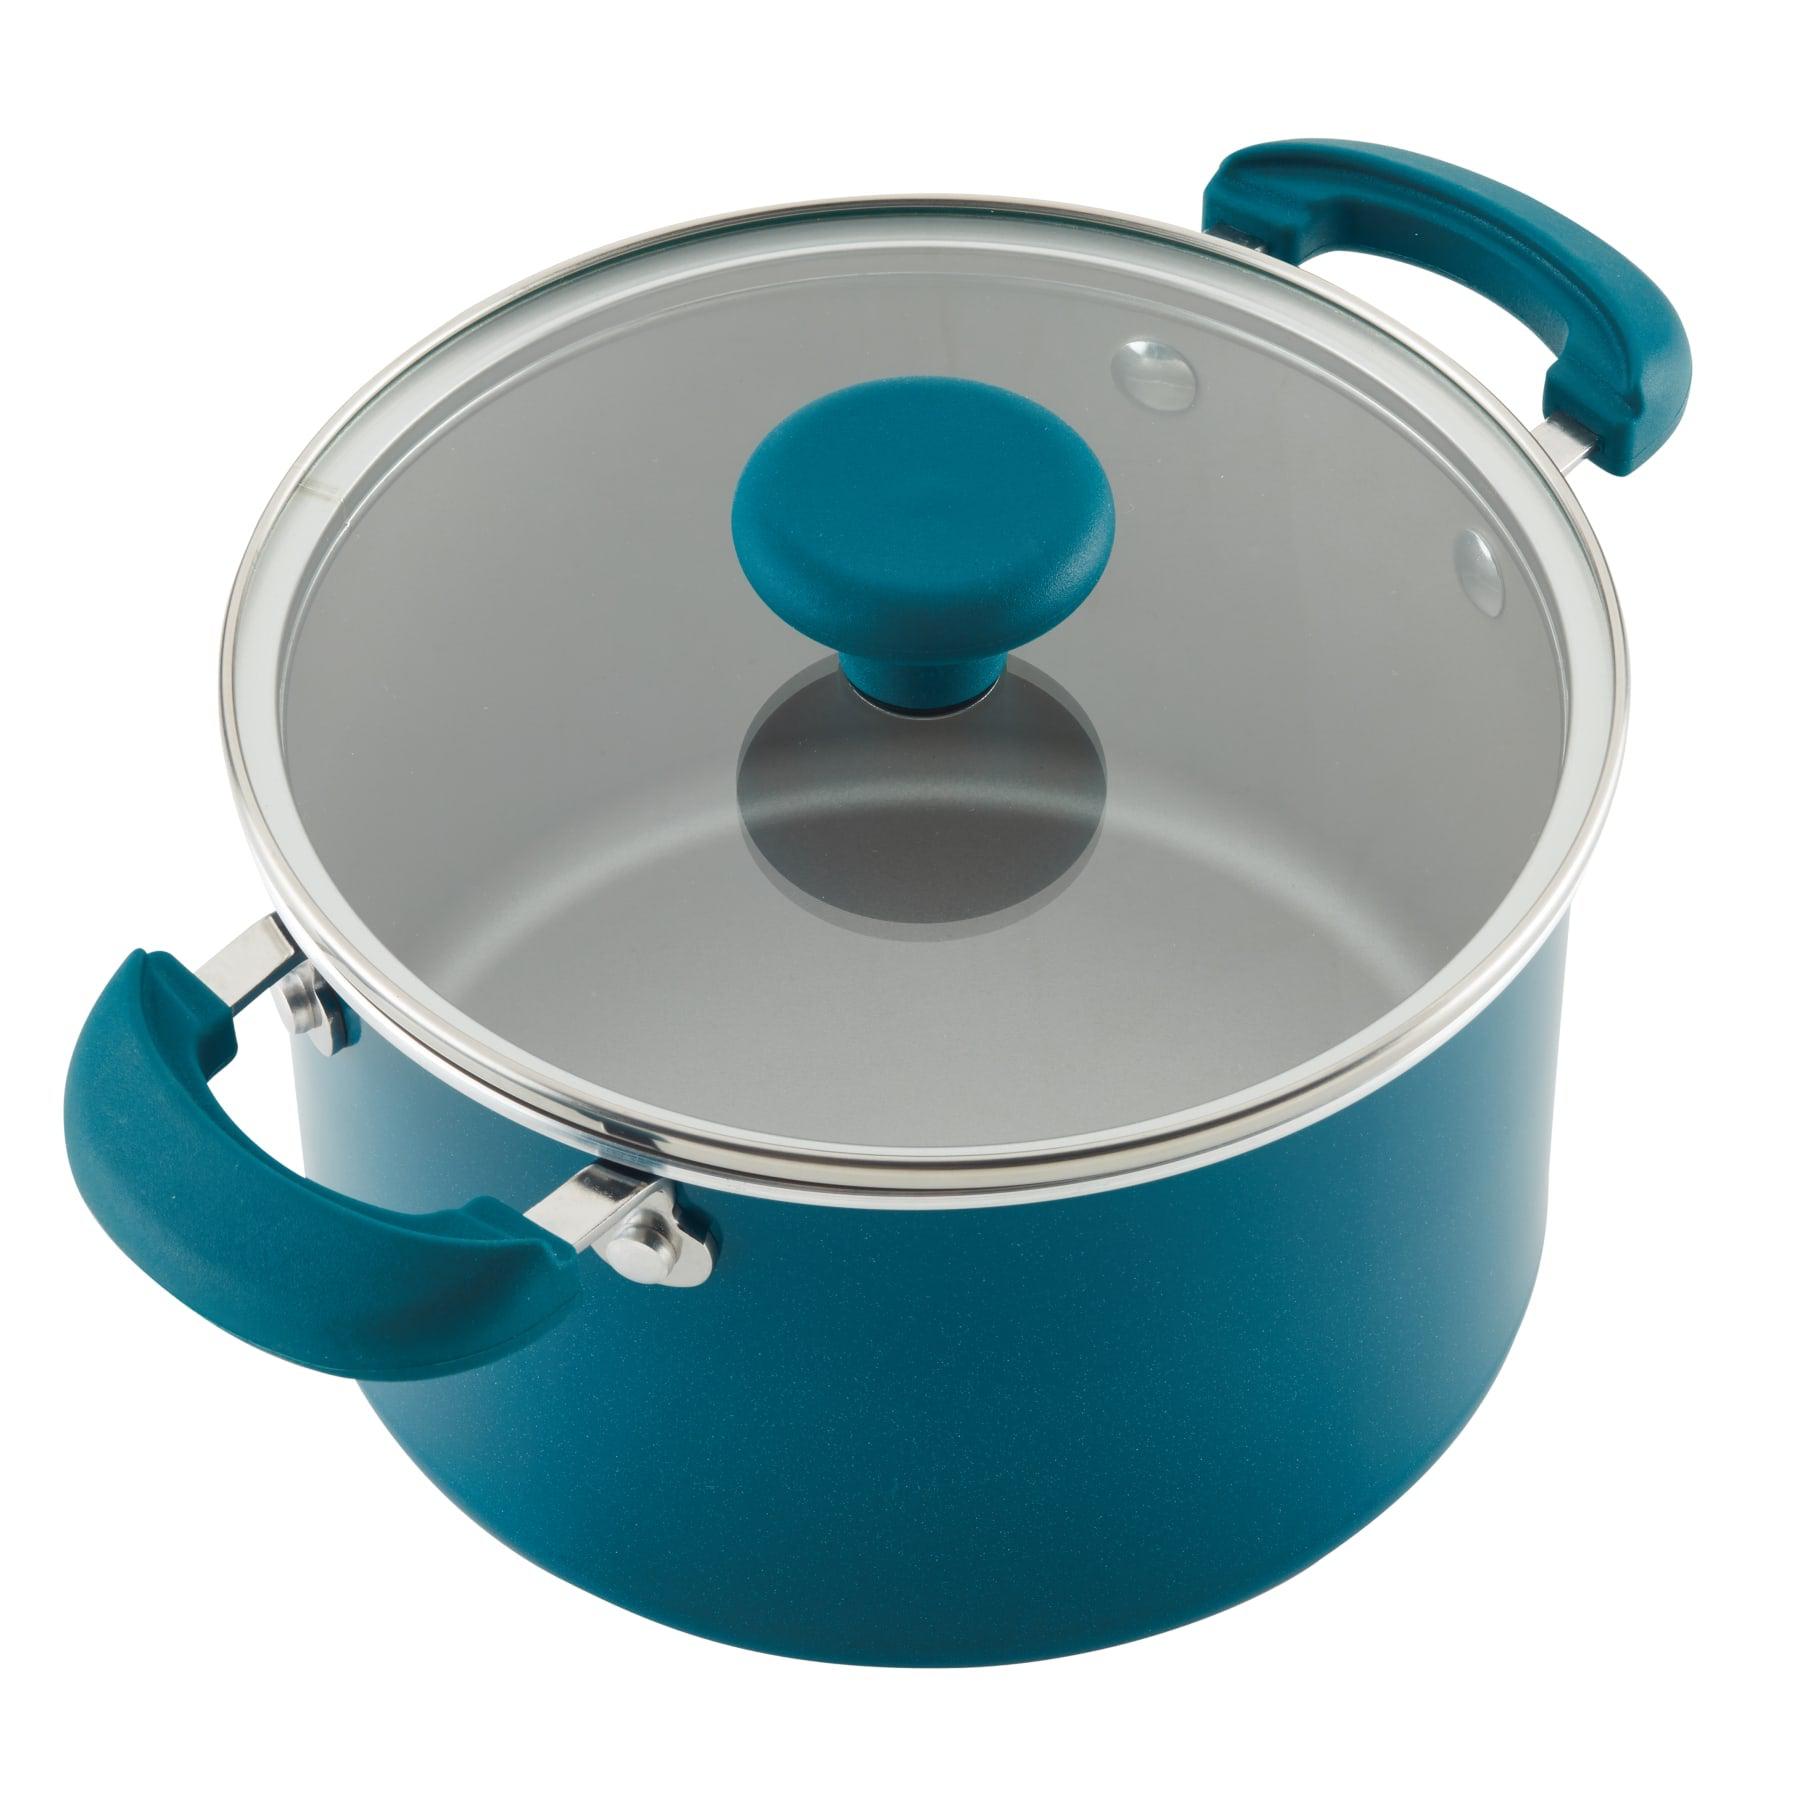 Rachael Ray Create Delicious Nonstick Cookware Pots and Pans Set, 13 Piece,  Teal Shimmer